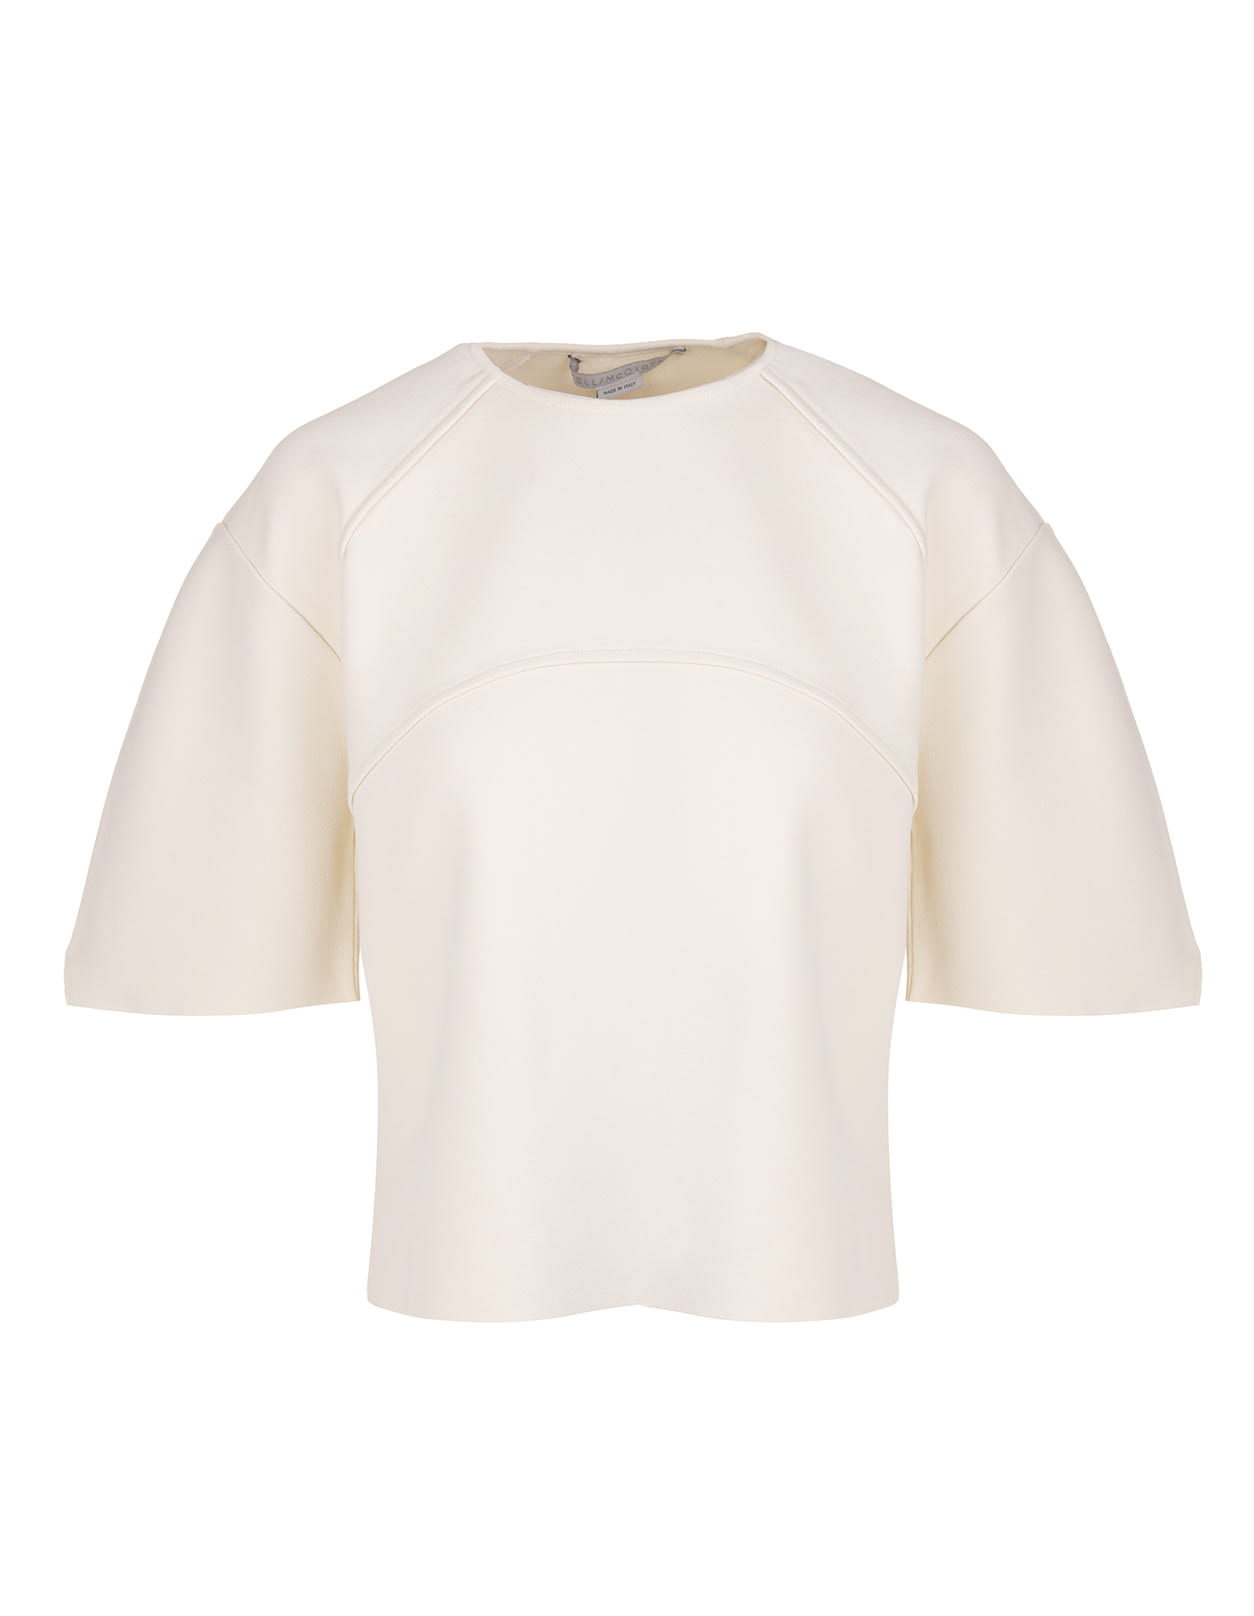 Stella McCartney Magnolia Structured Cropped Top